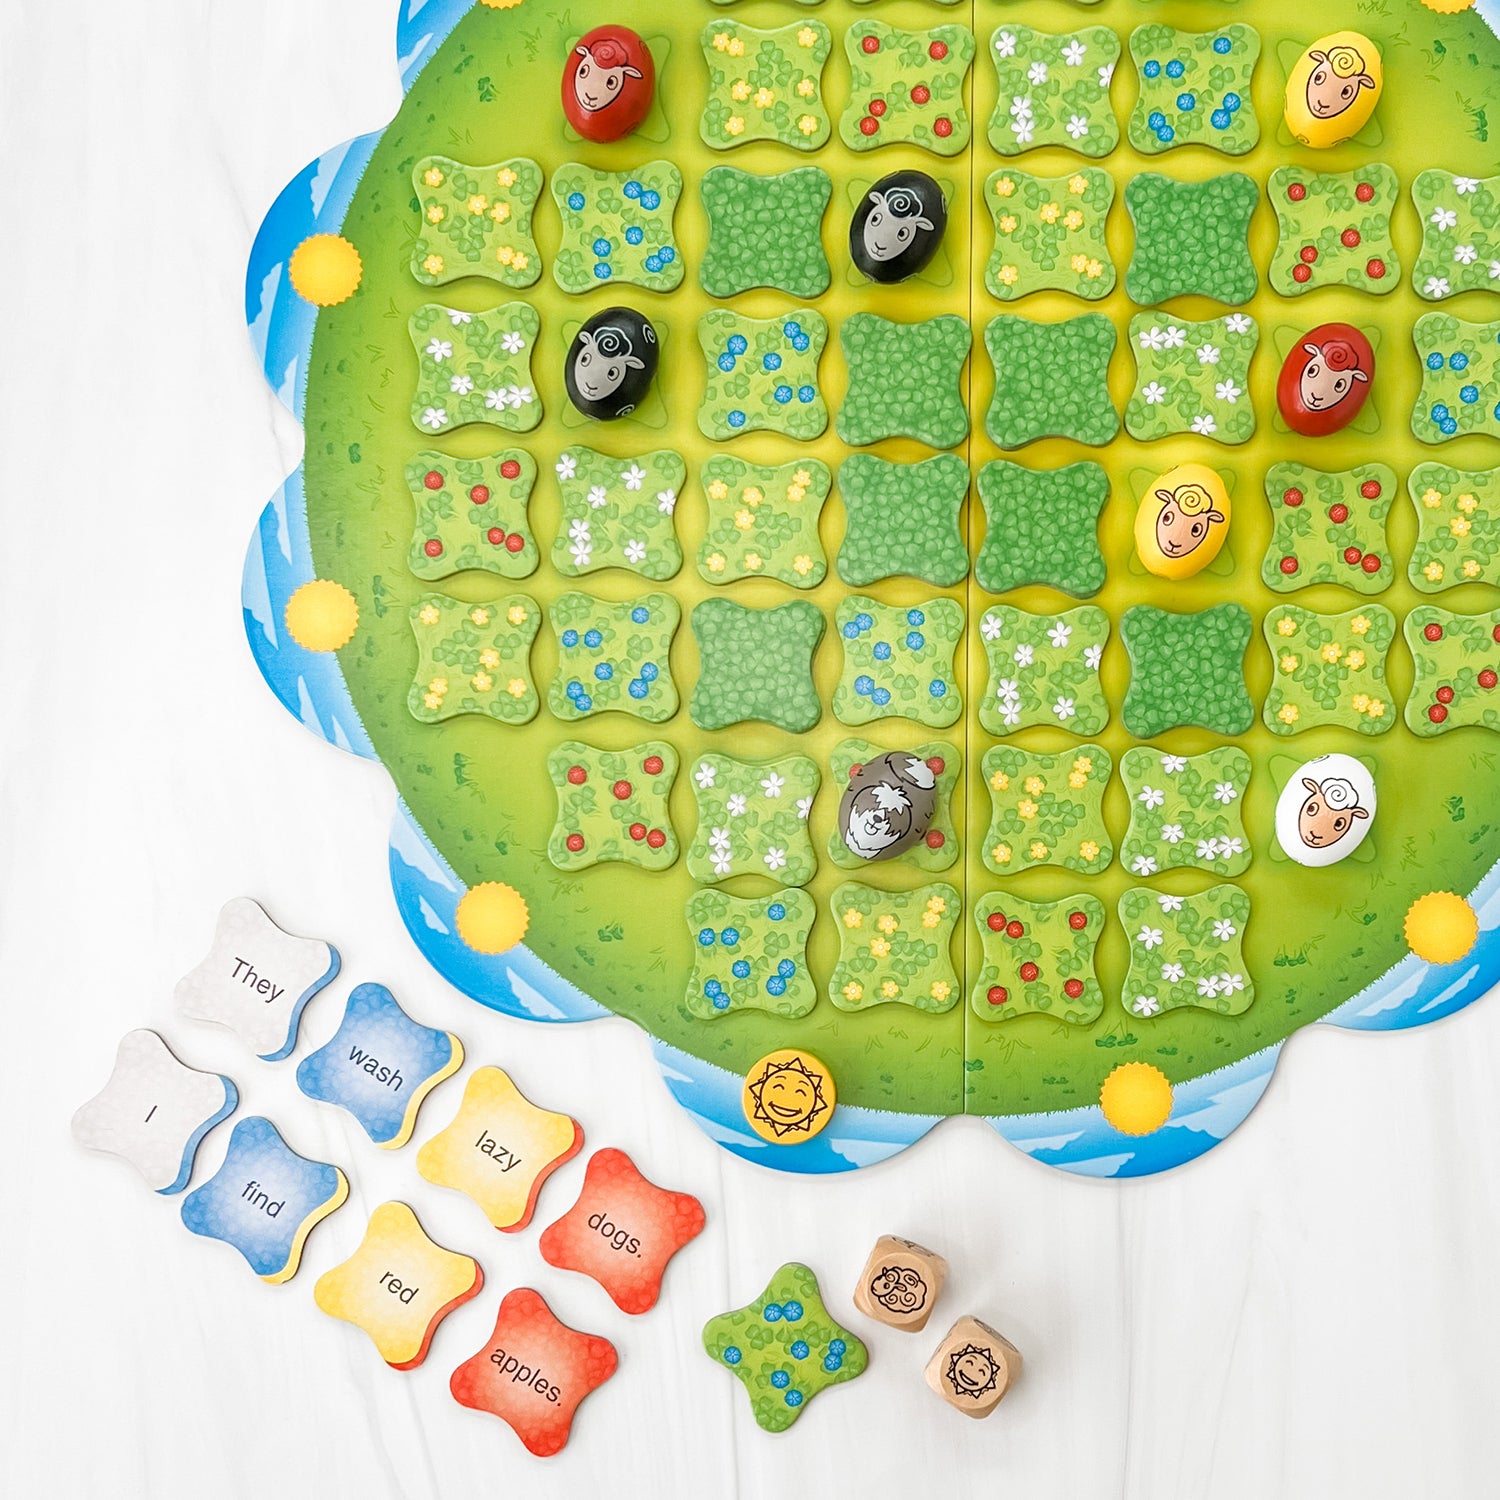 So Clover! game review - The Board Game Family